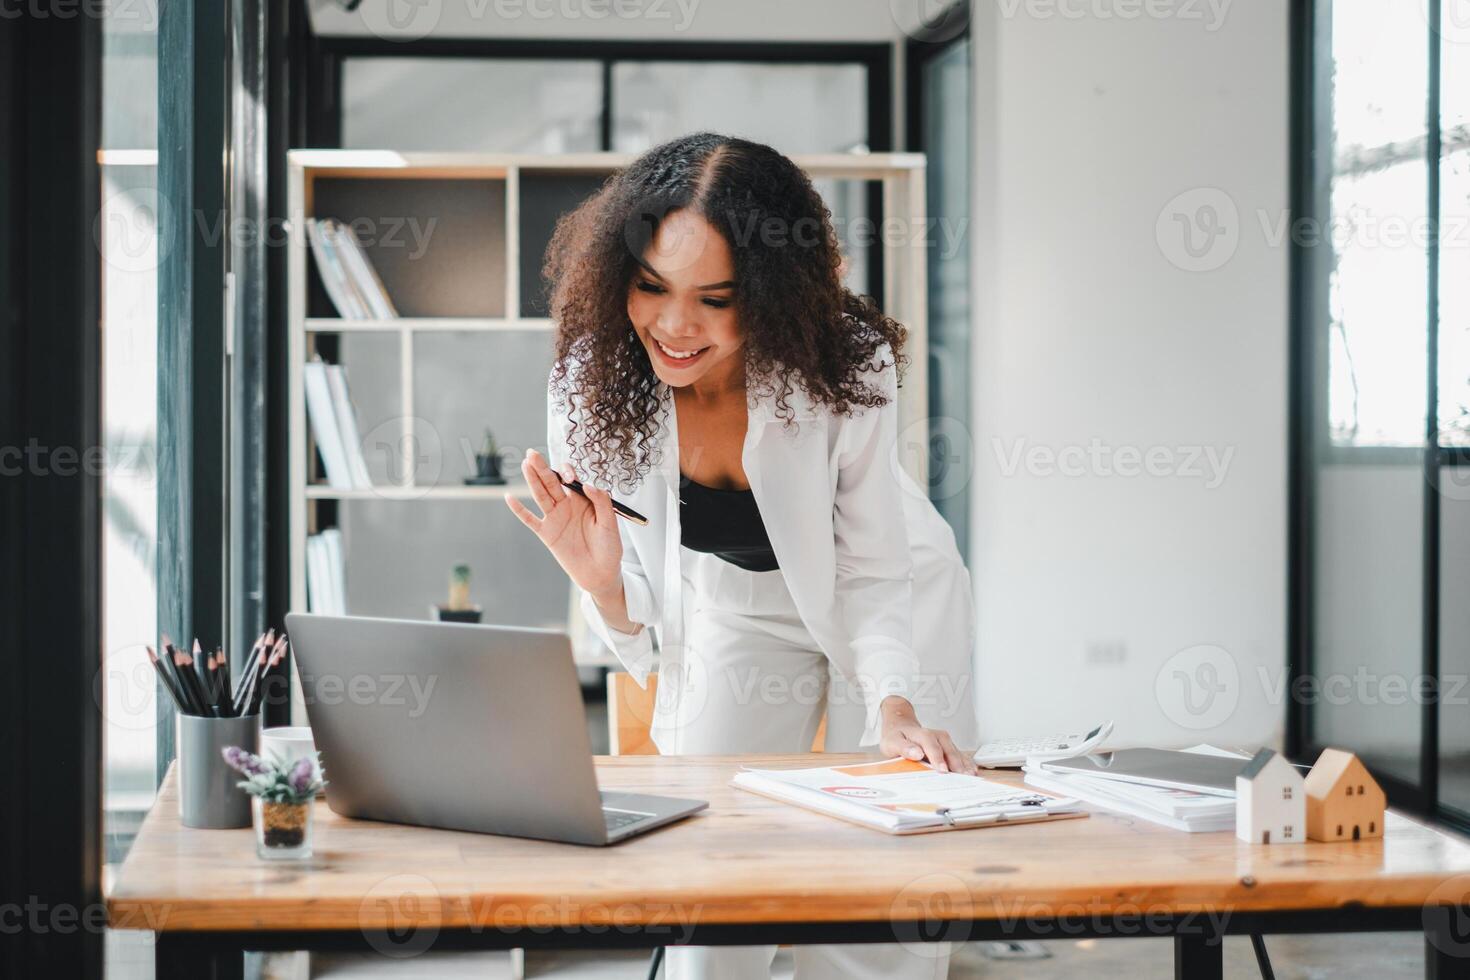 A charismatic businesswoman gestures during an animated conversation, likely on a video call, as she stands at her work desk in a bright, contemporary office space. photo